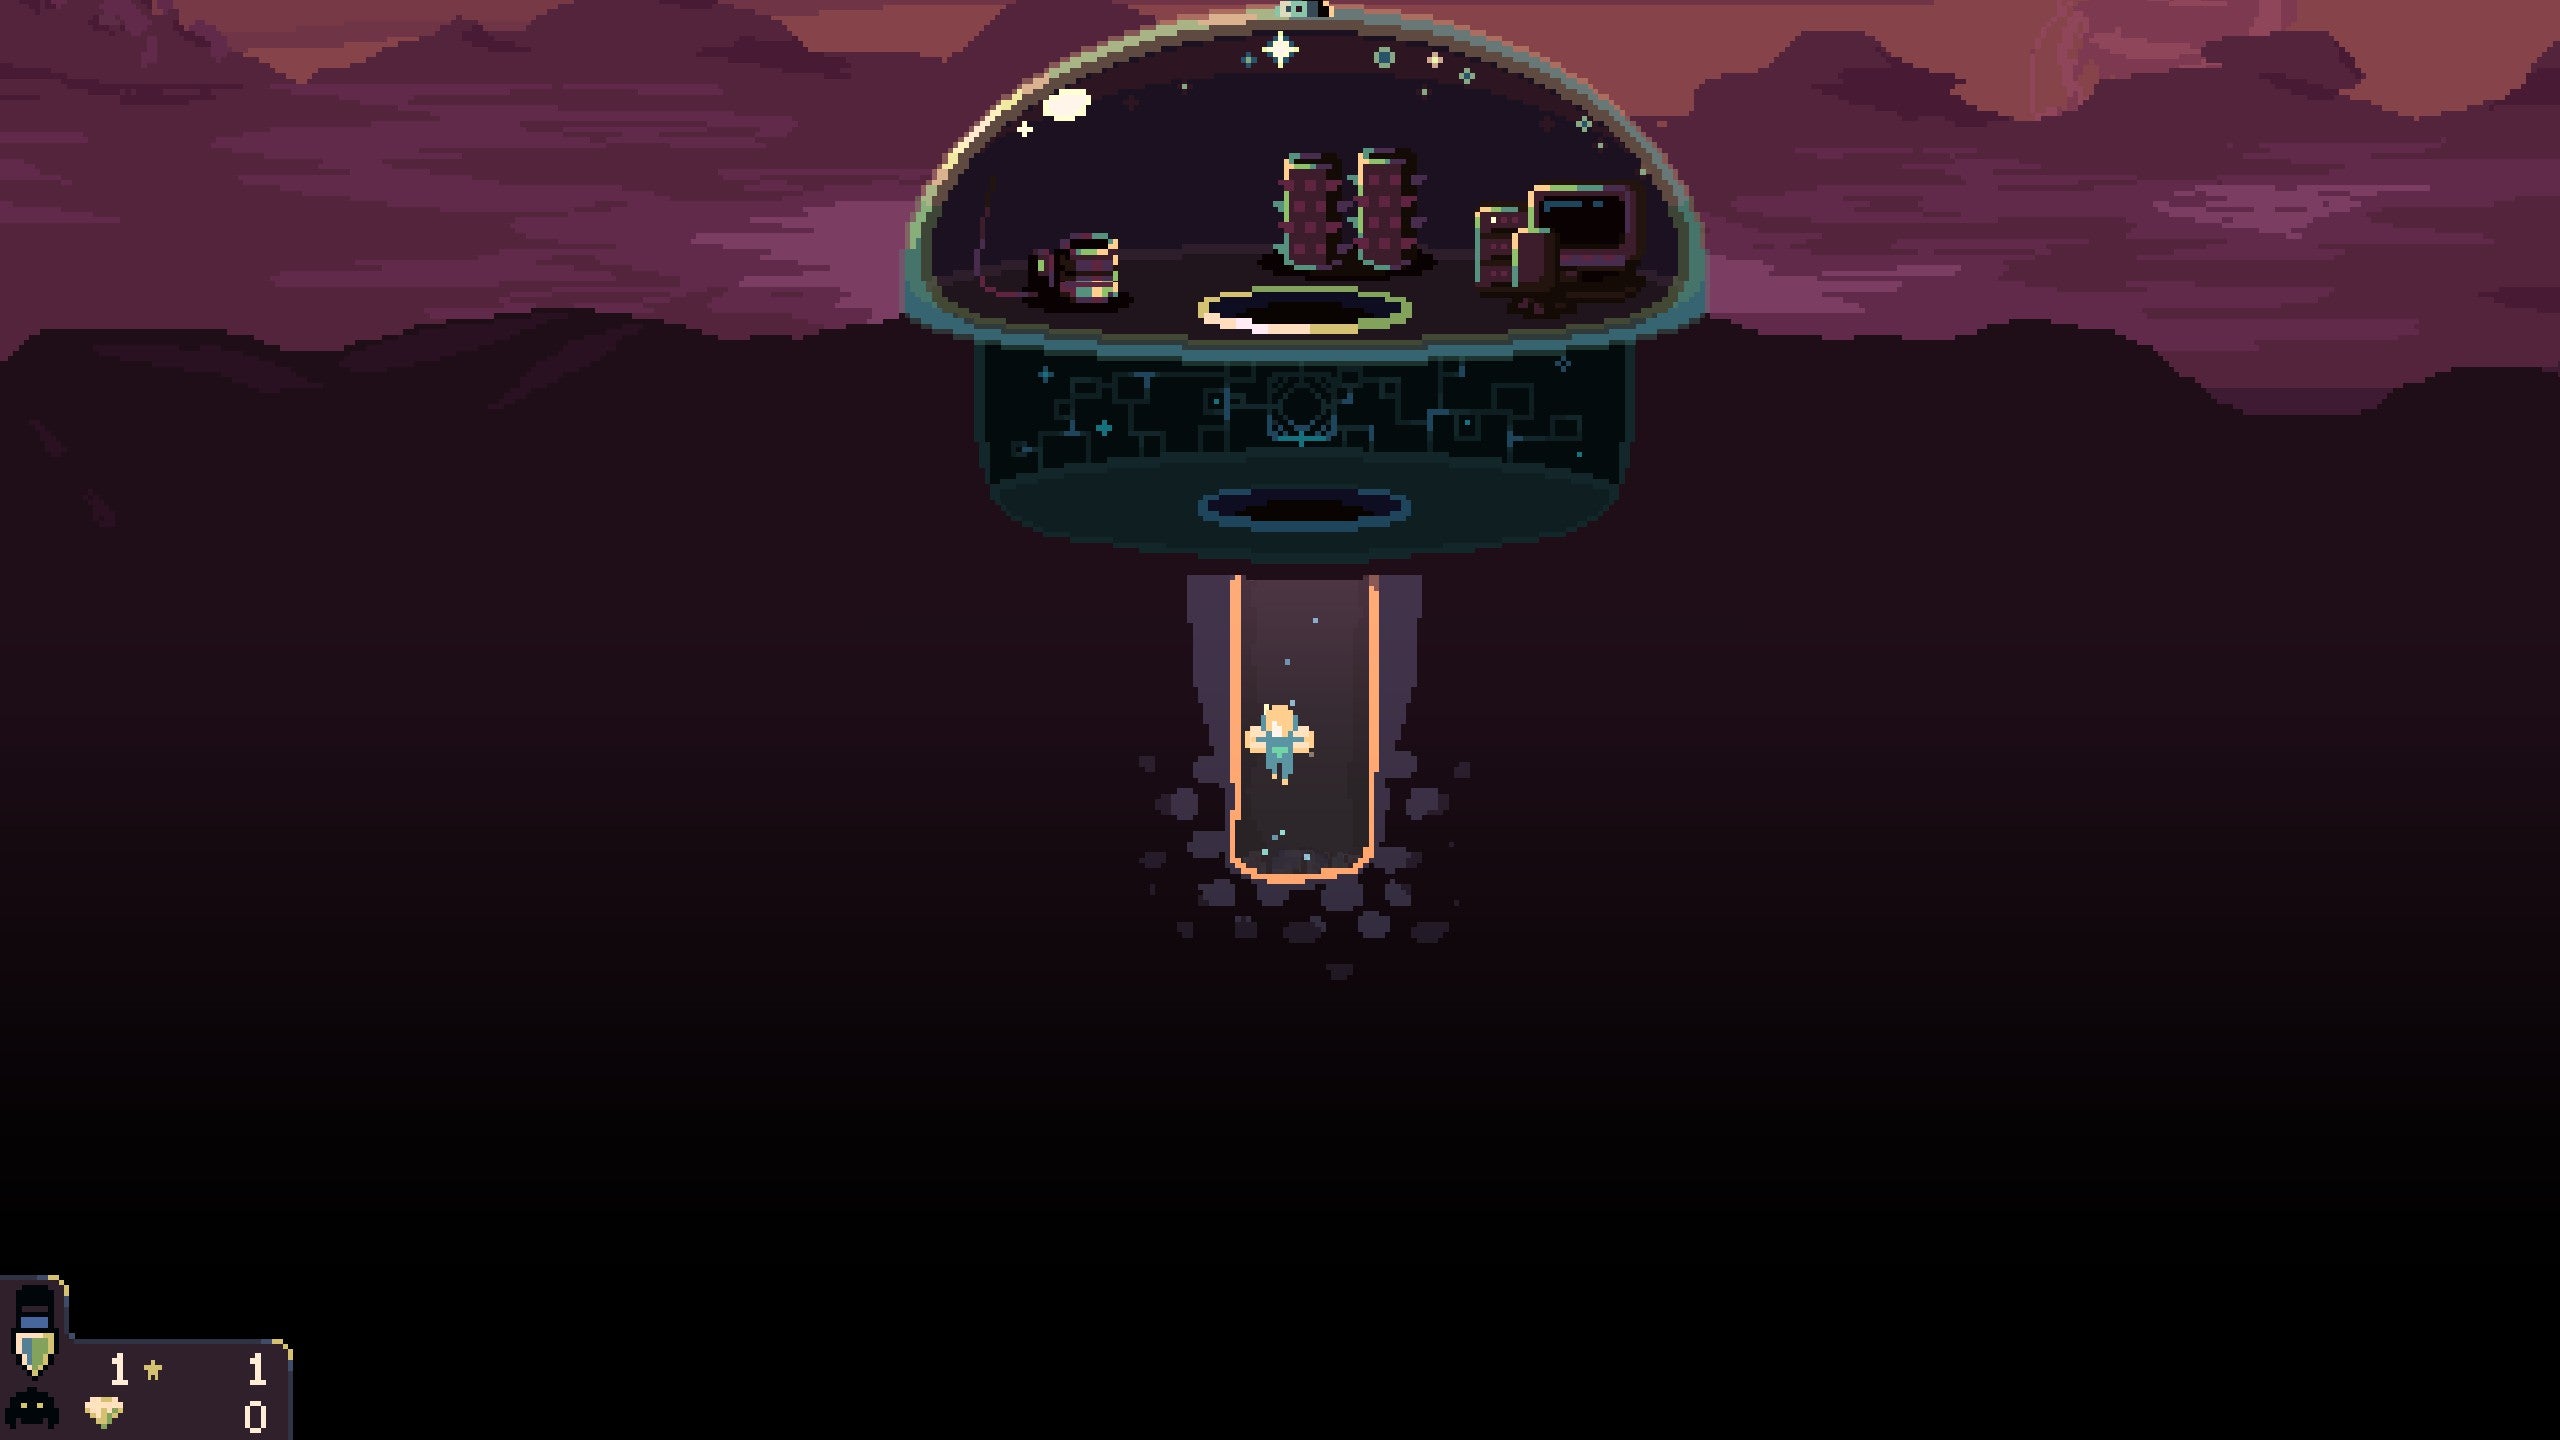 The beginning of a Dome Keeper game. A small glass-domed base, and a small tube leading to the ground below.